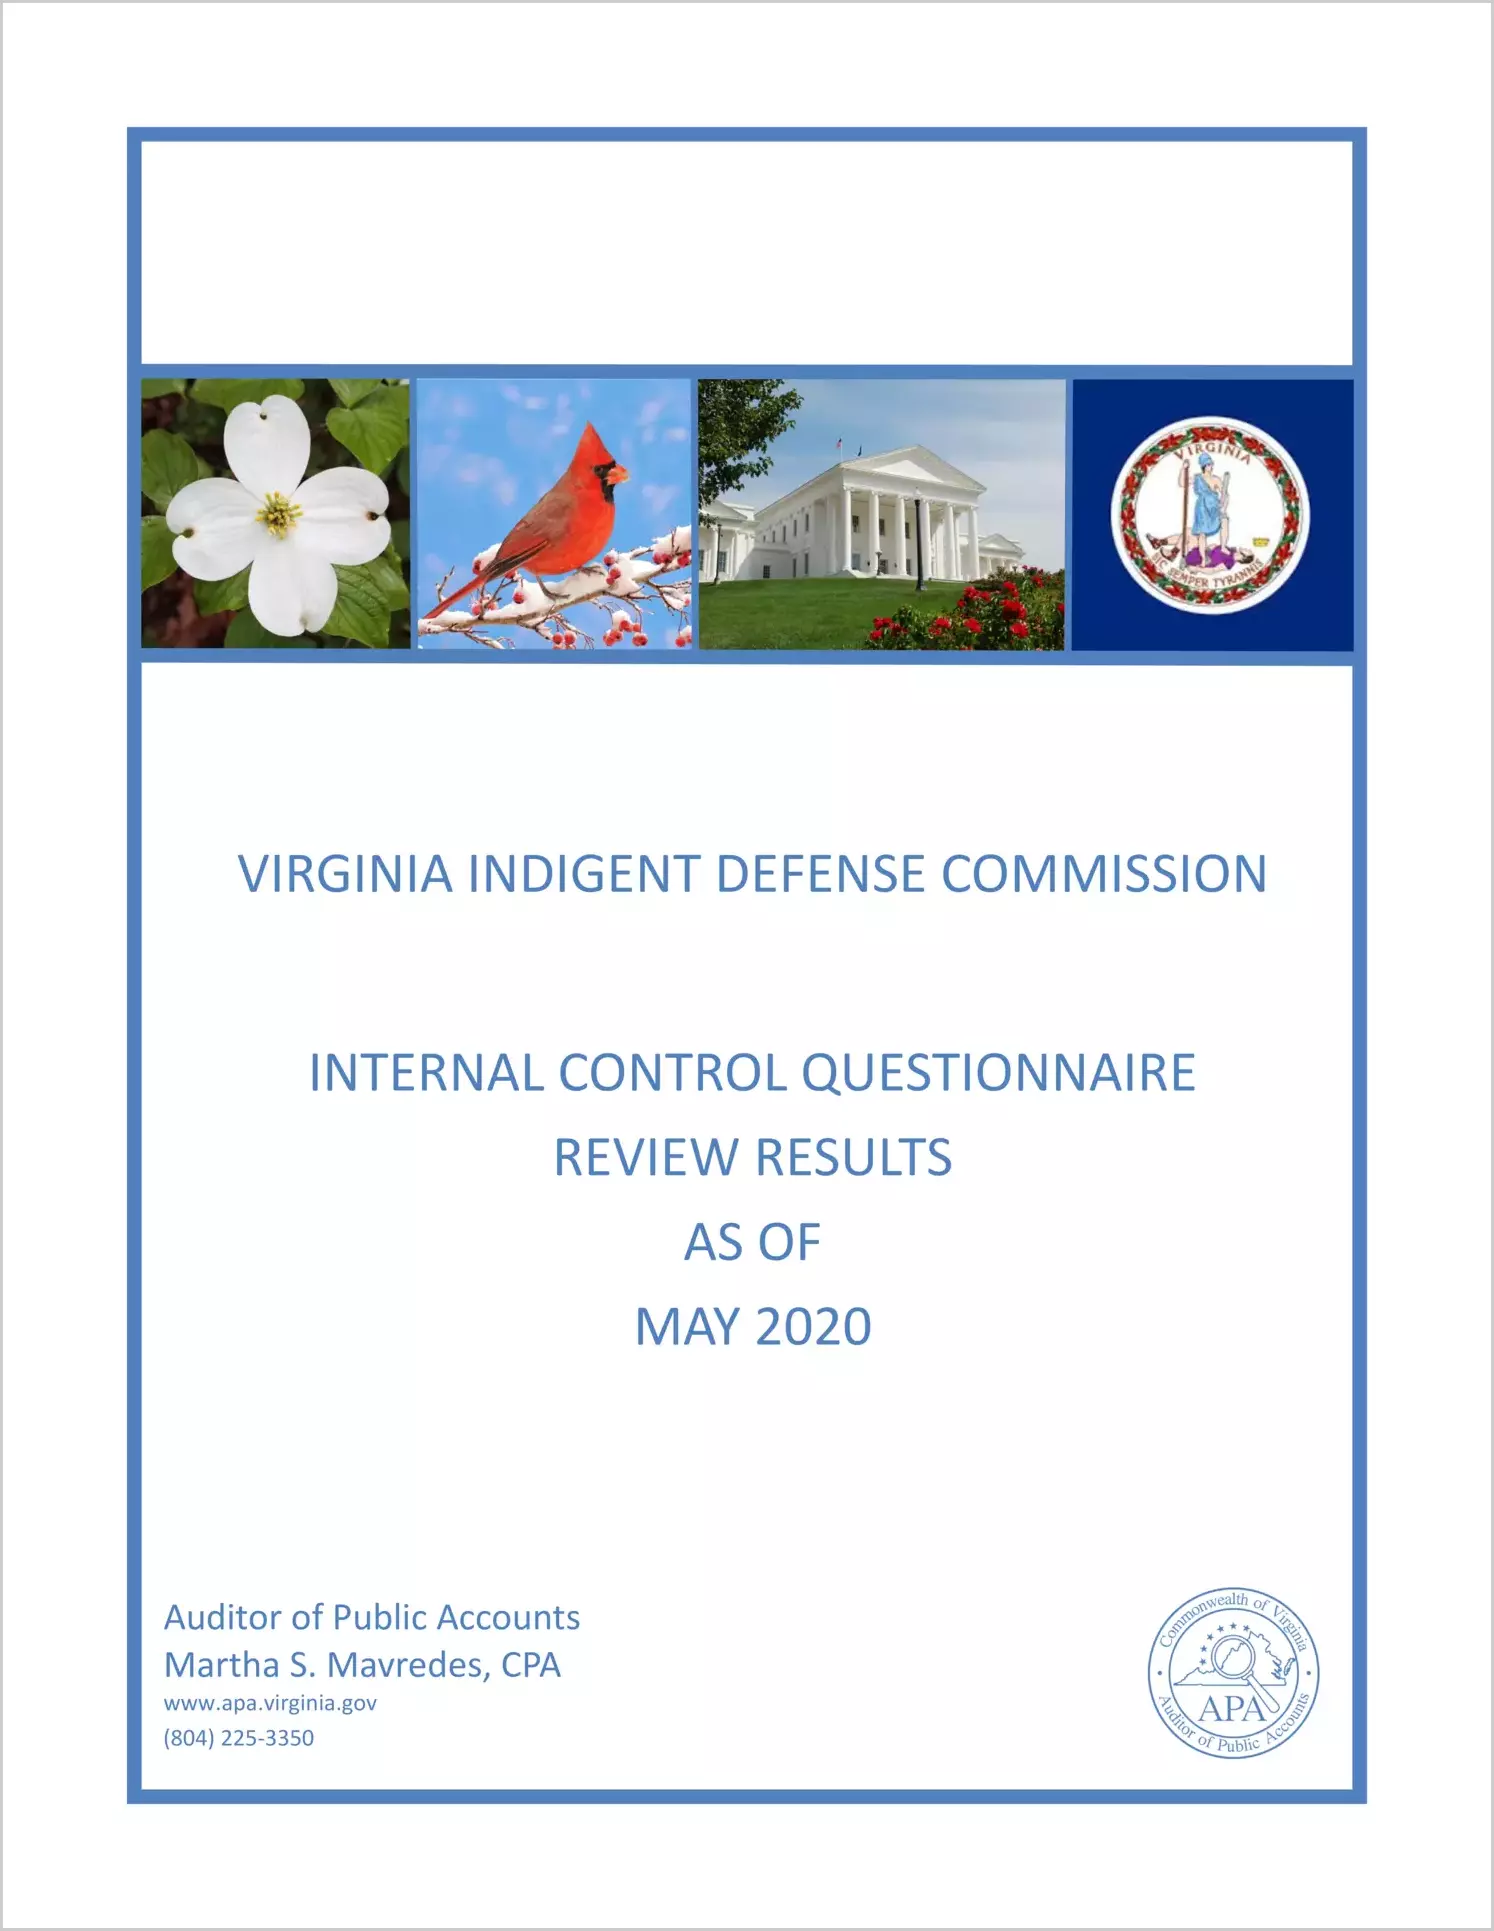 Virginia Indigent Defense Commission Internal Control Questionnaire Review Results as of May 2020